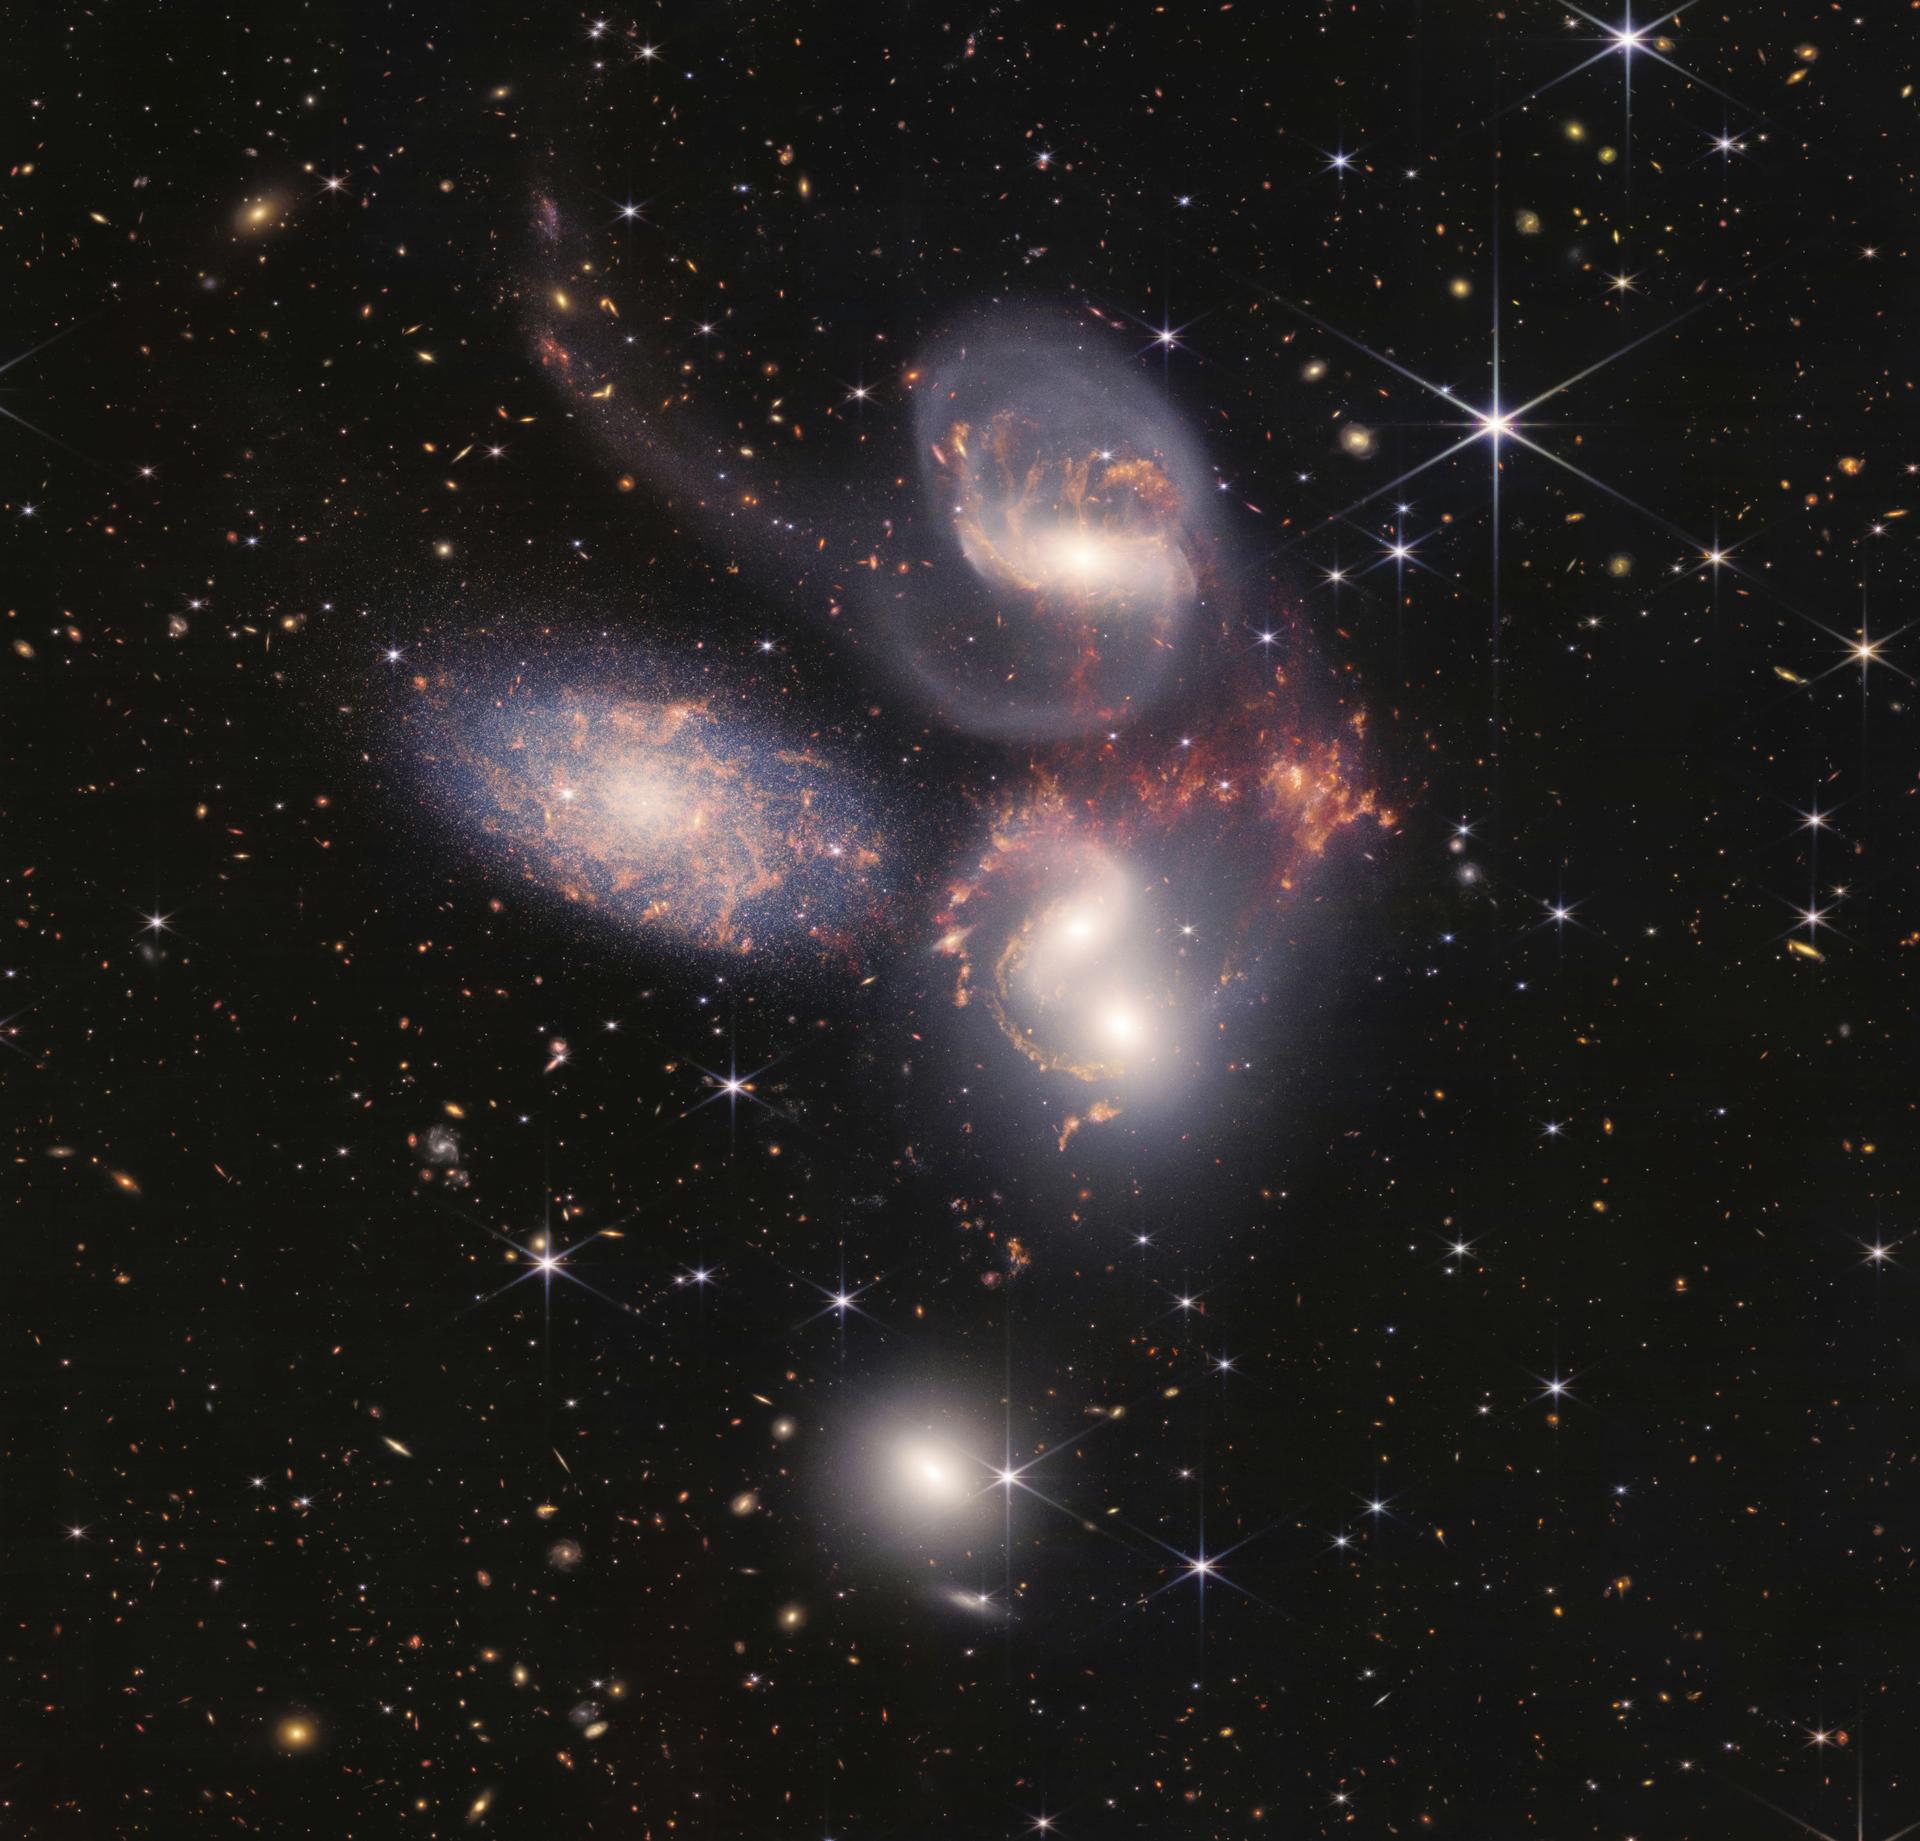 This image shows Stephan's Quintet, a visual grouping of five galaxies captured by the Webb Telescope's Near-Infrared Camera (NIRCam) and Mid-Infrared Instrument (MIRI)